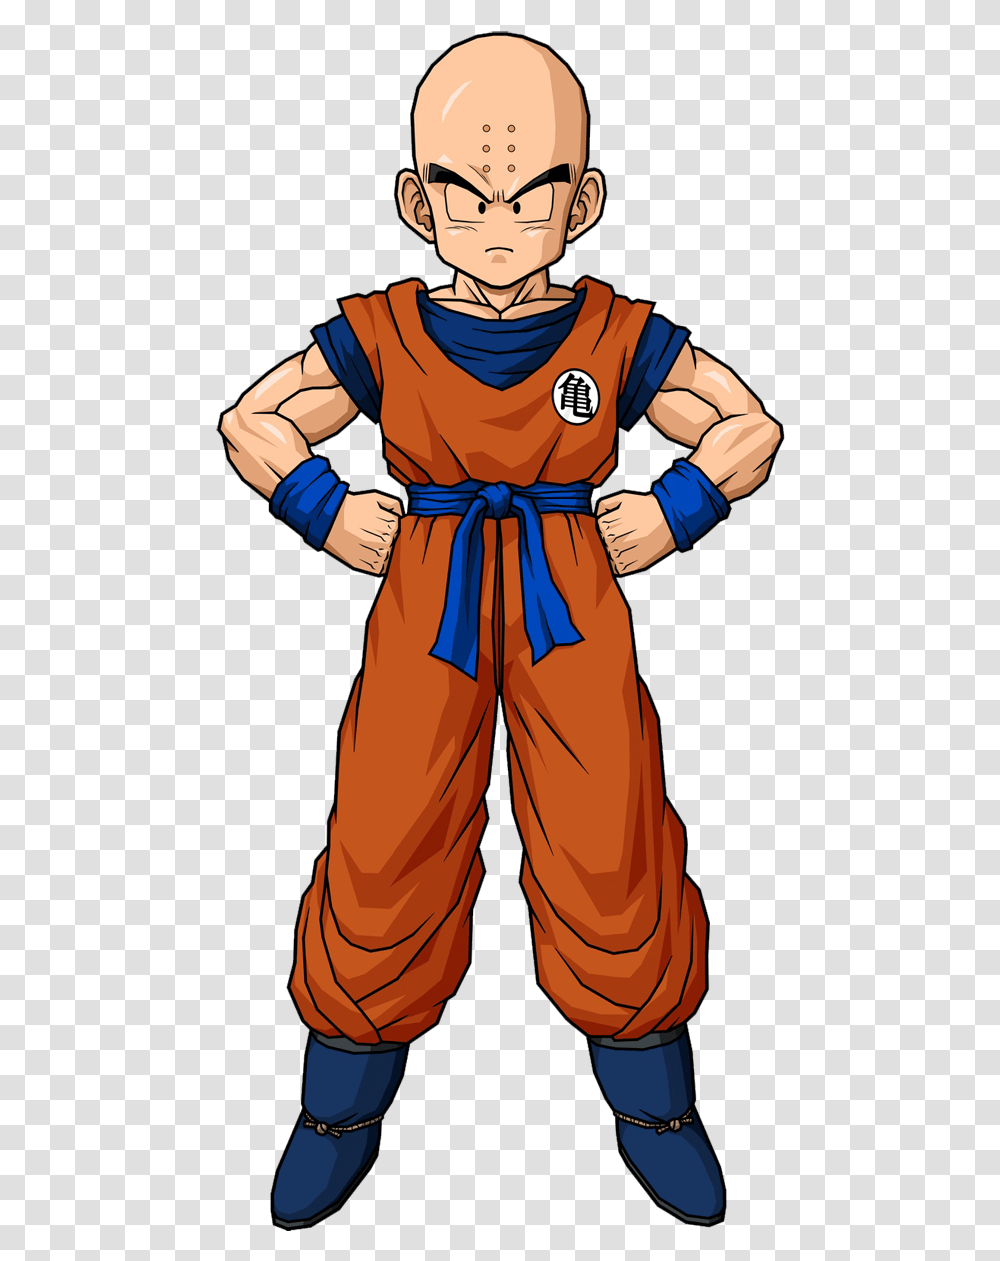 Dragon Ball Z Krillin Image With Krillin Dragon Ball Z, Costume, Person, Clothing, Hand Transparent Png